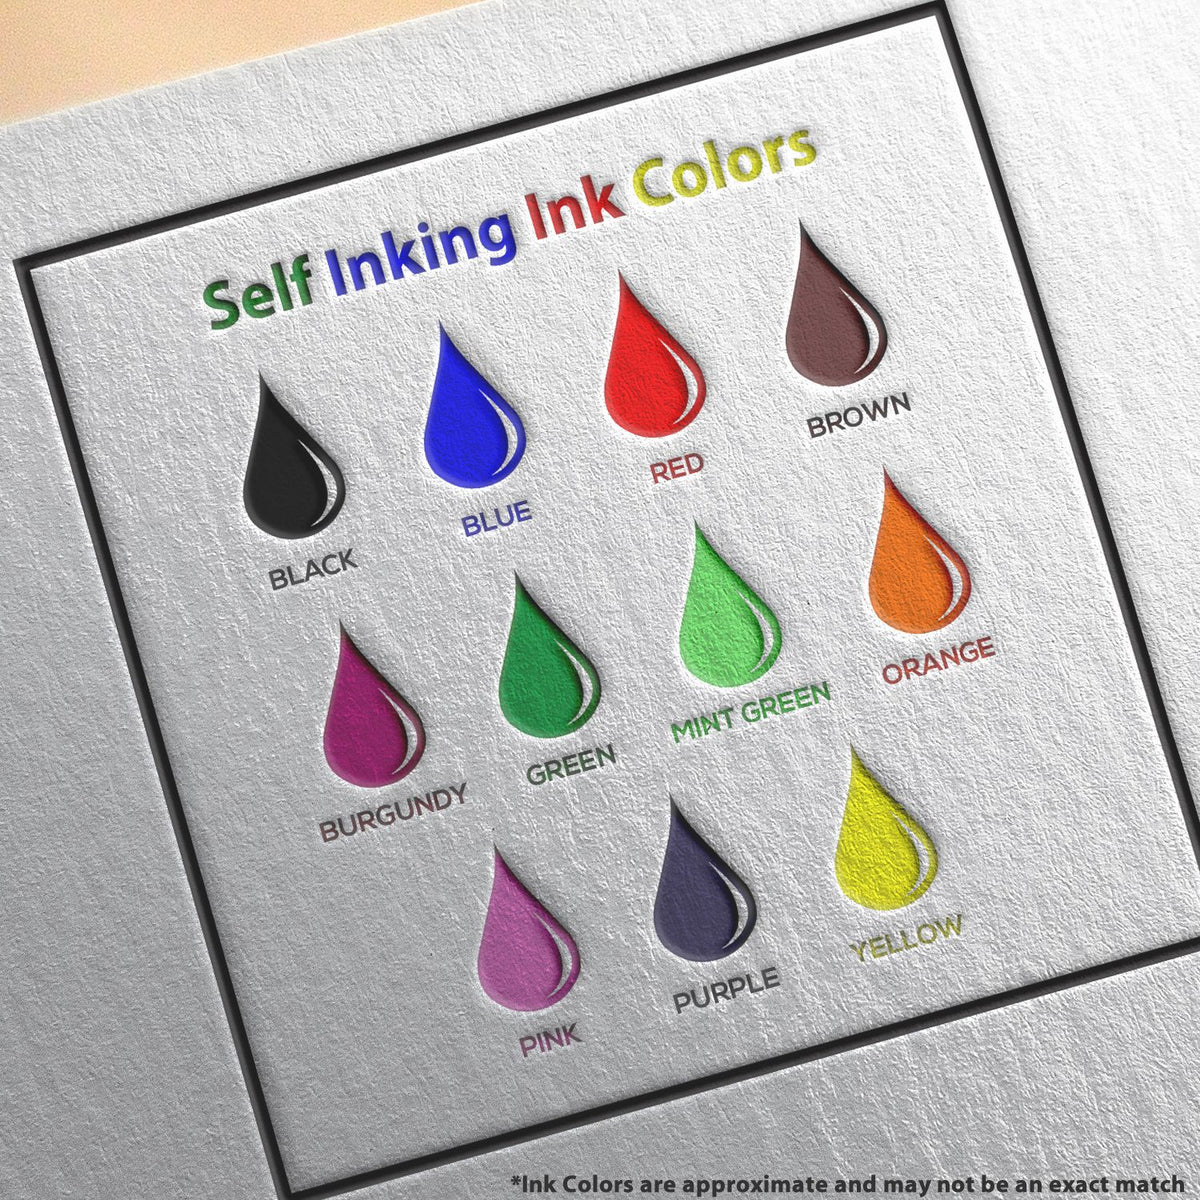 A picture showing the different ink colors or hues available for the Self-Inking Colorado PE Stamp product.